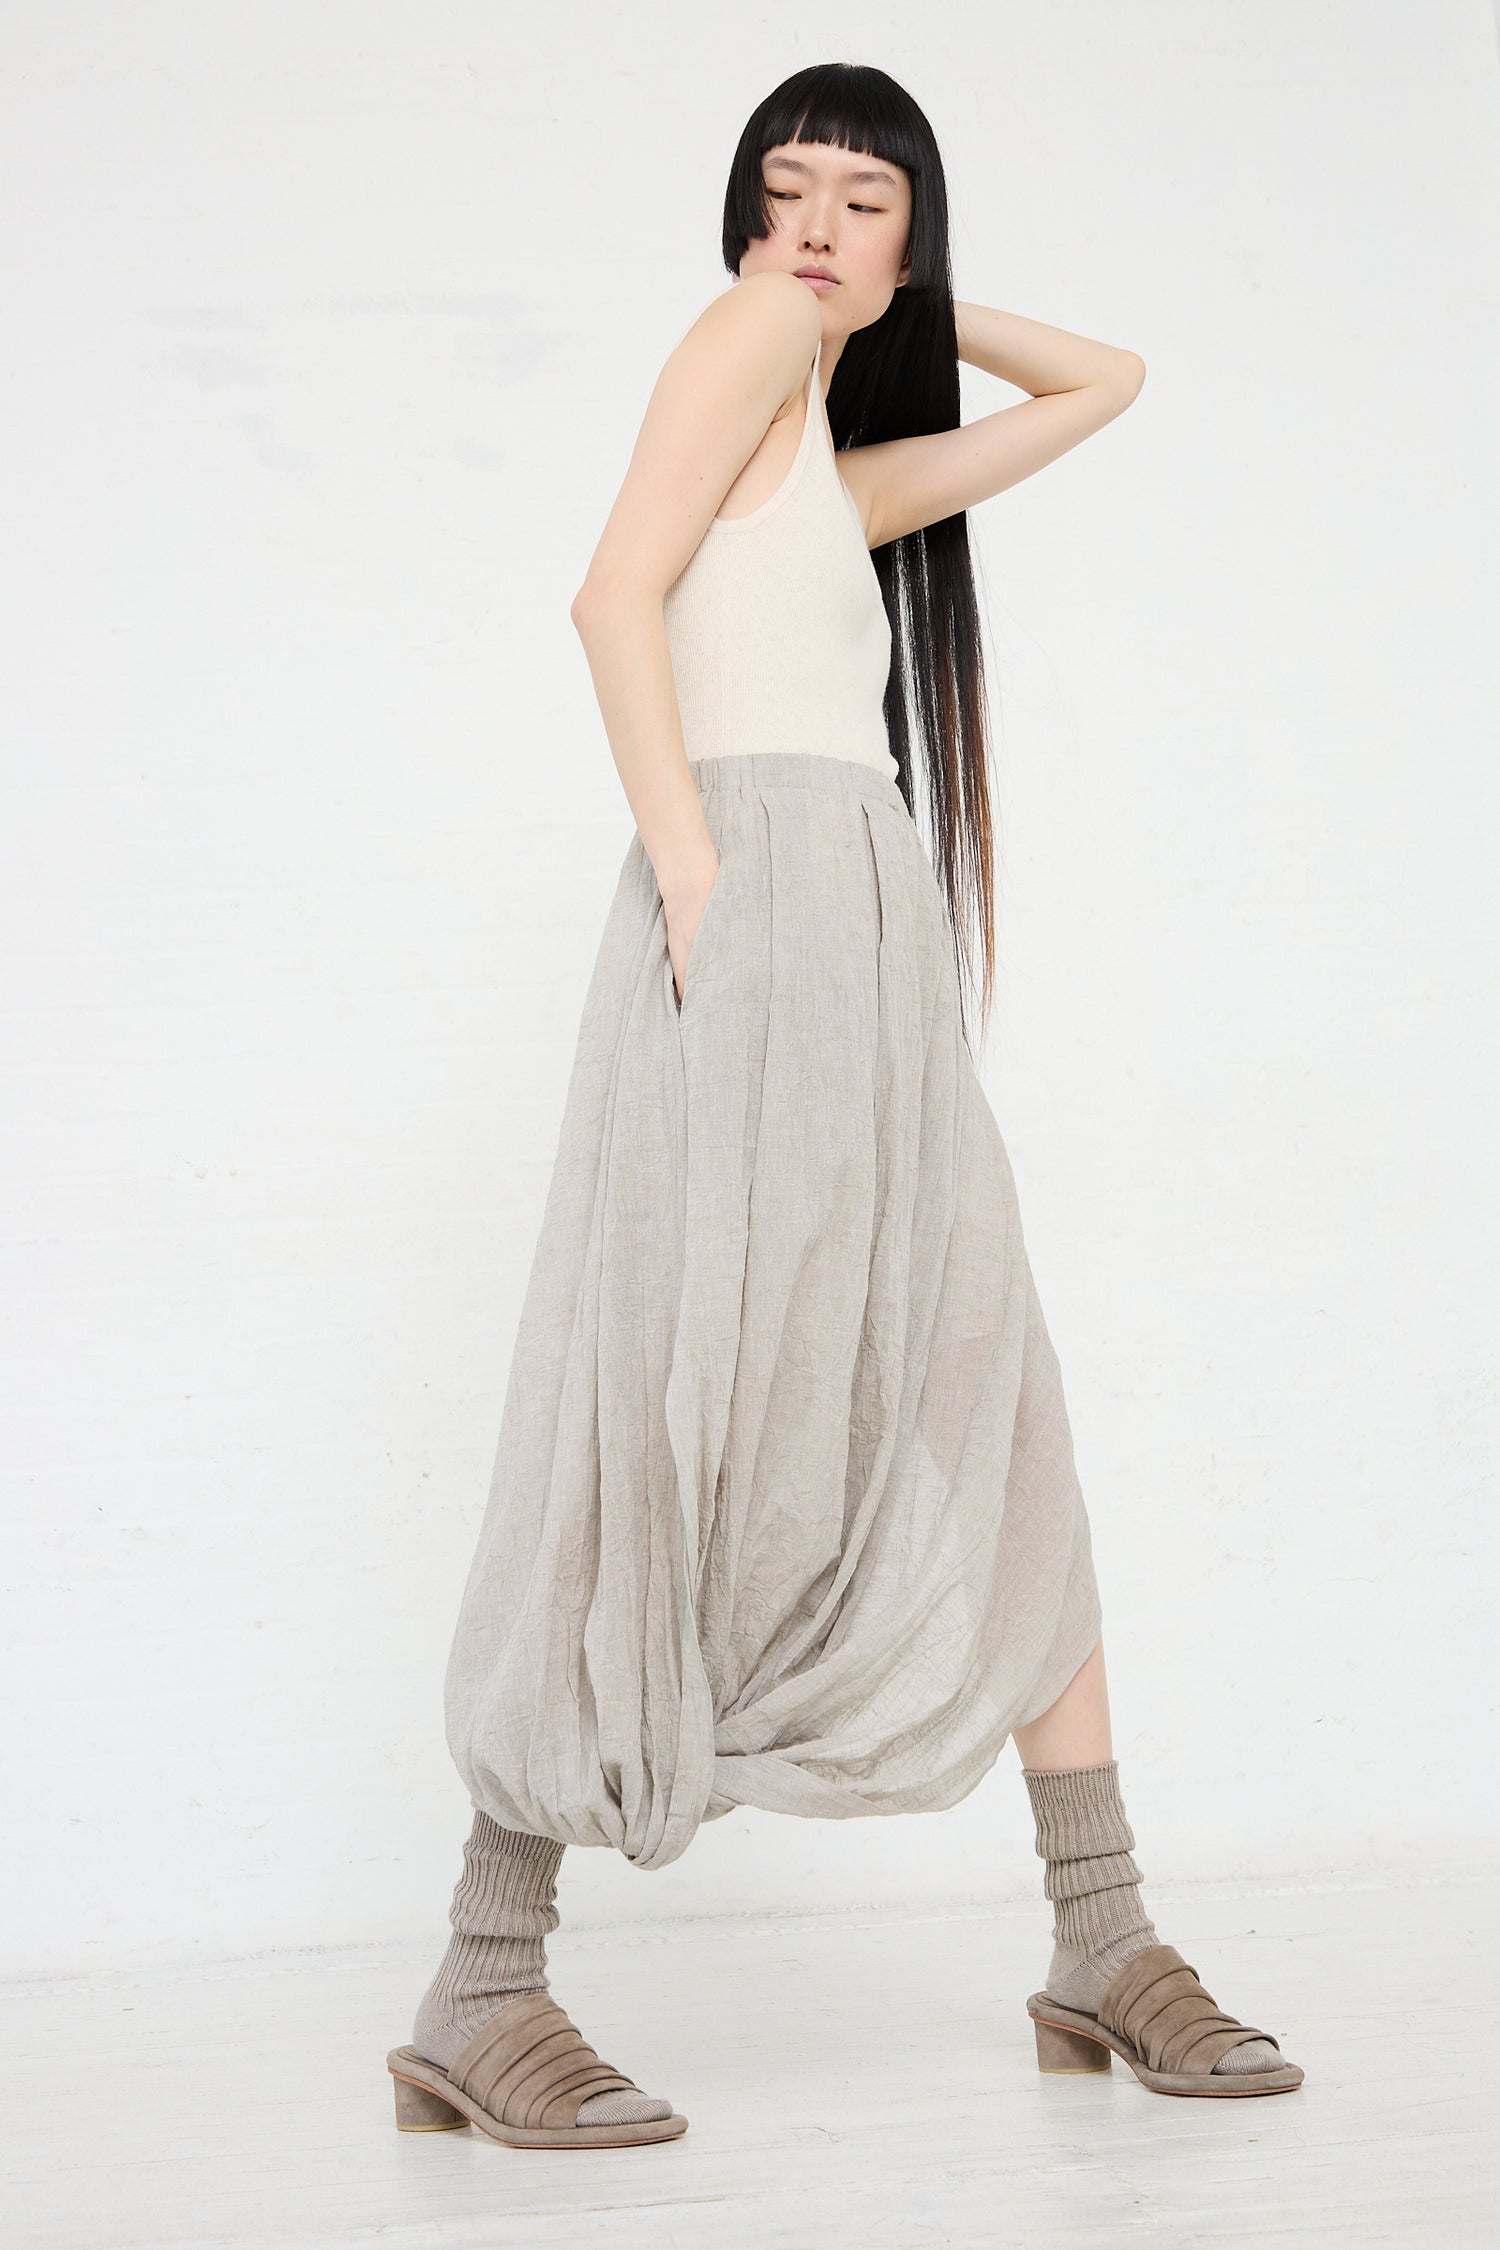 A woman in a beige cotton/linen blend top and Lauren Manoogian's Gauze Twist Skirt in Ash poses against a white background, her arm resting on her head.